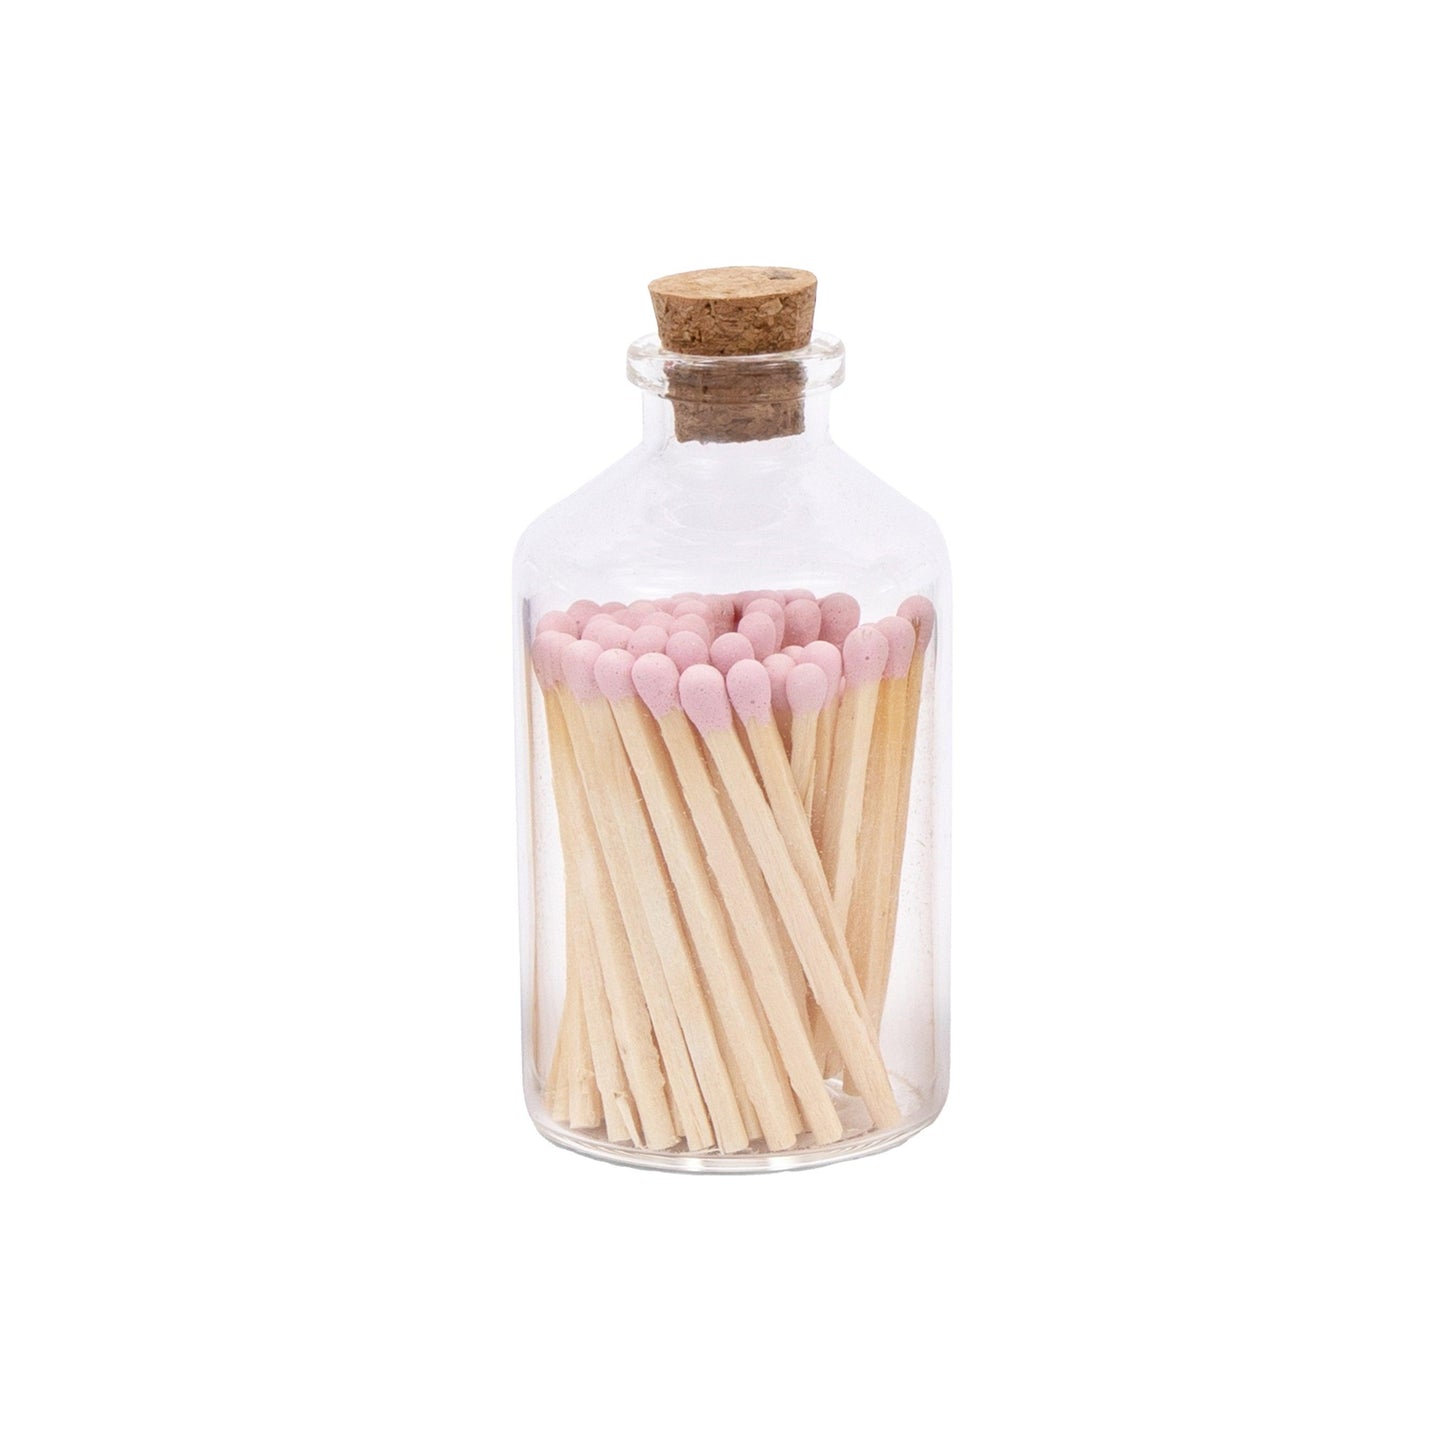 Apothecary Match Glass Jar by Giften Market